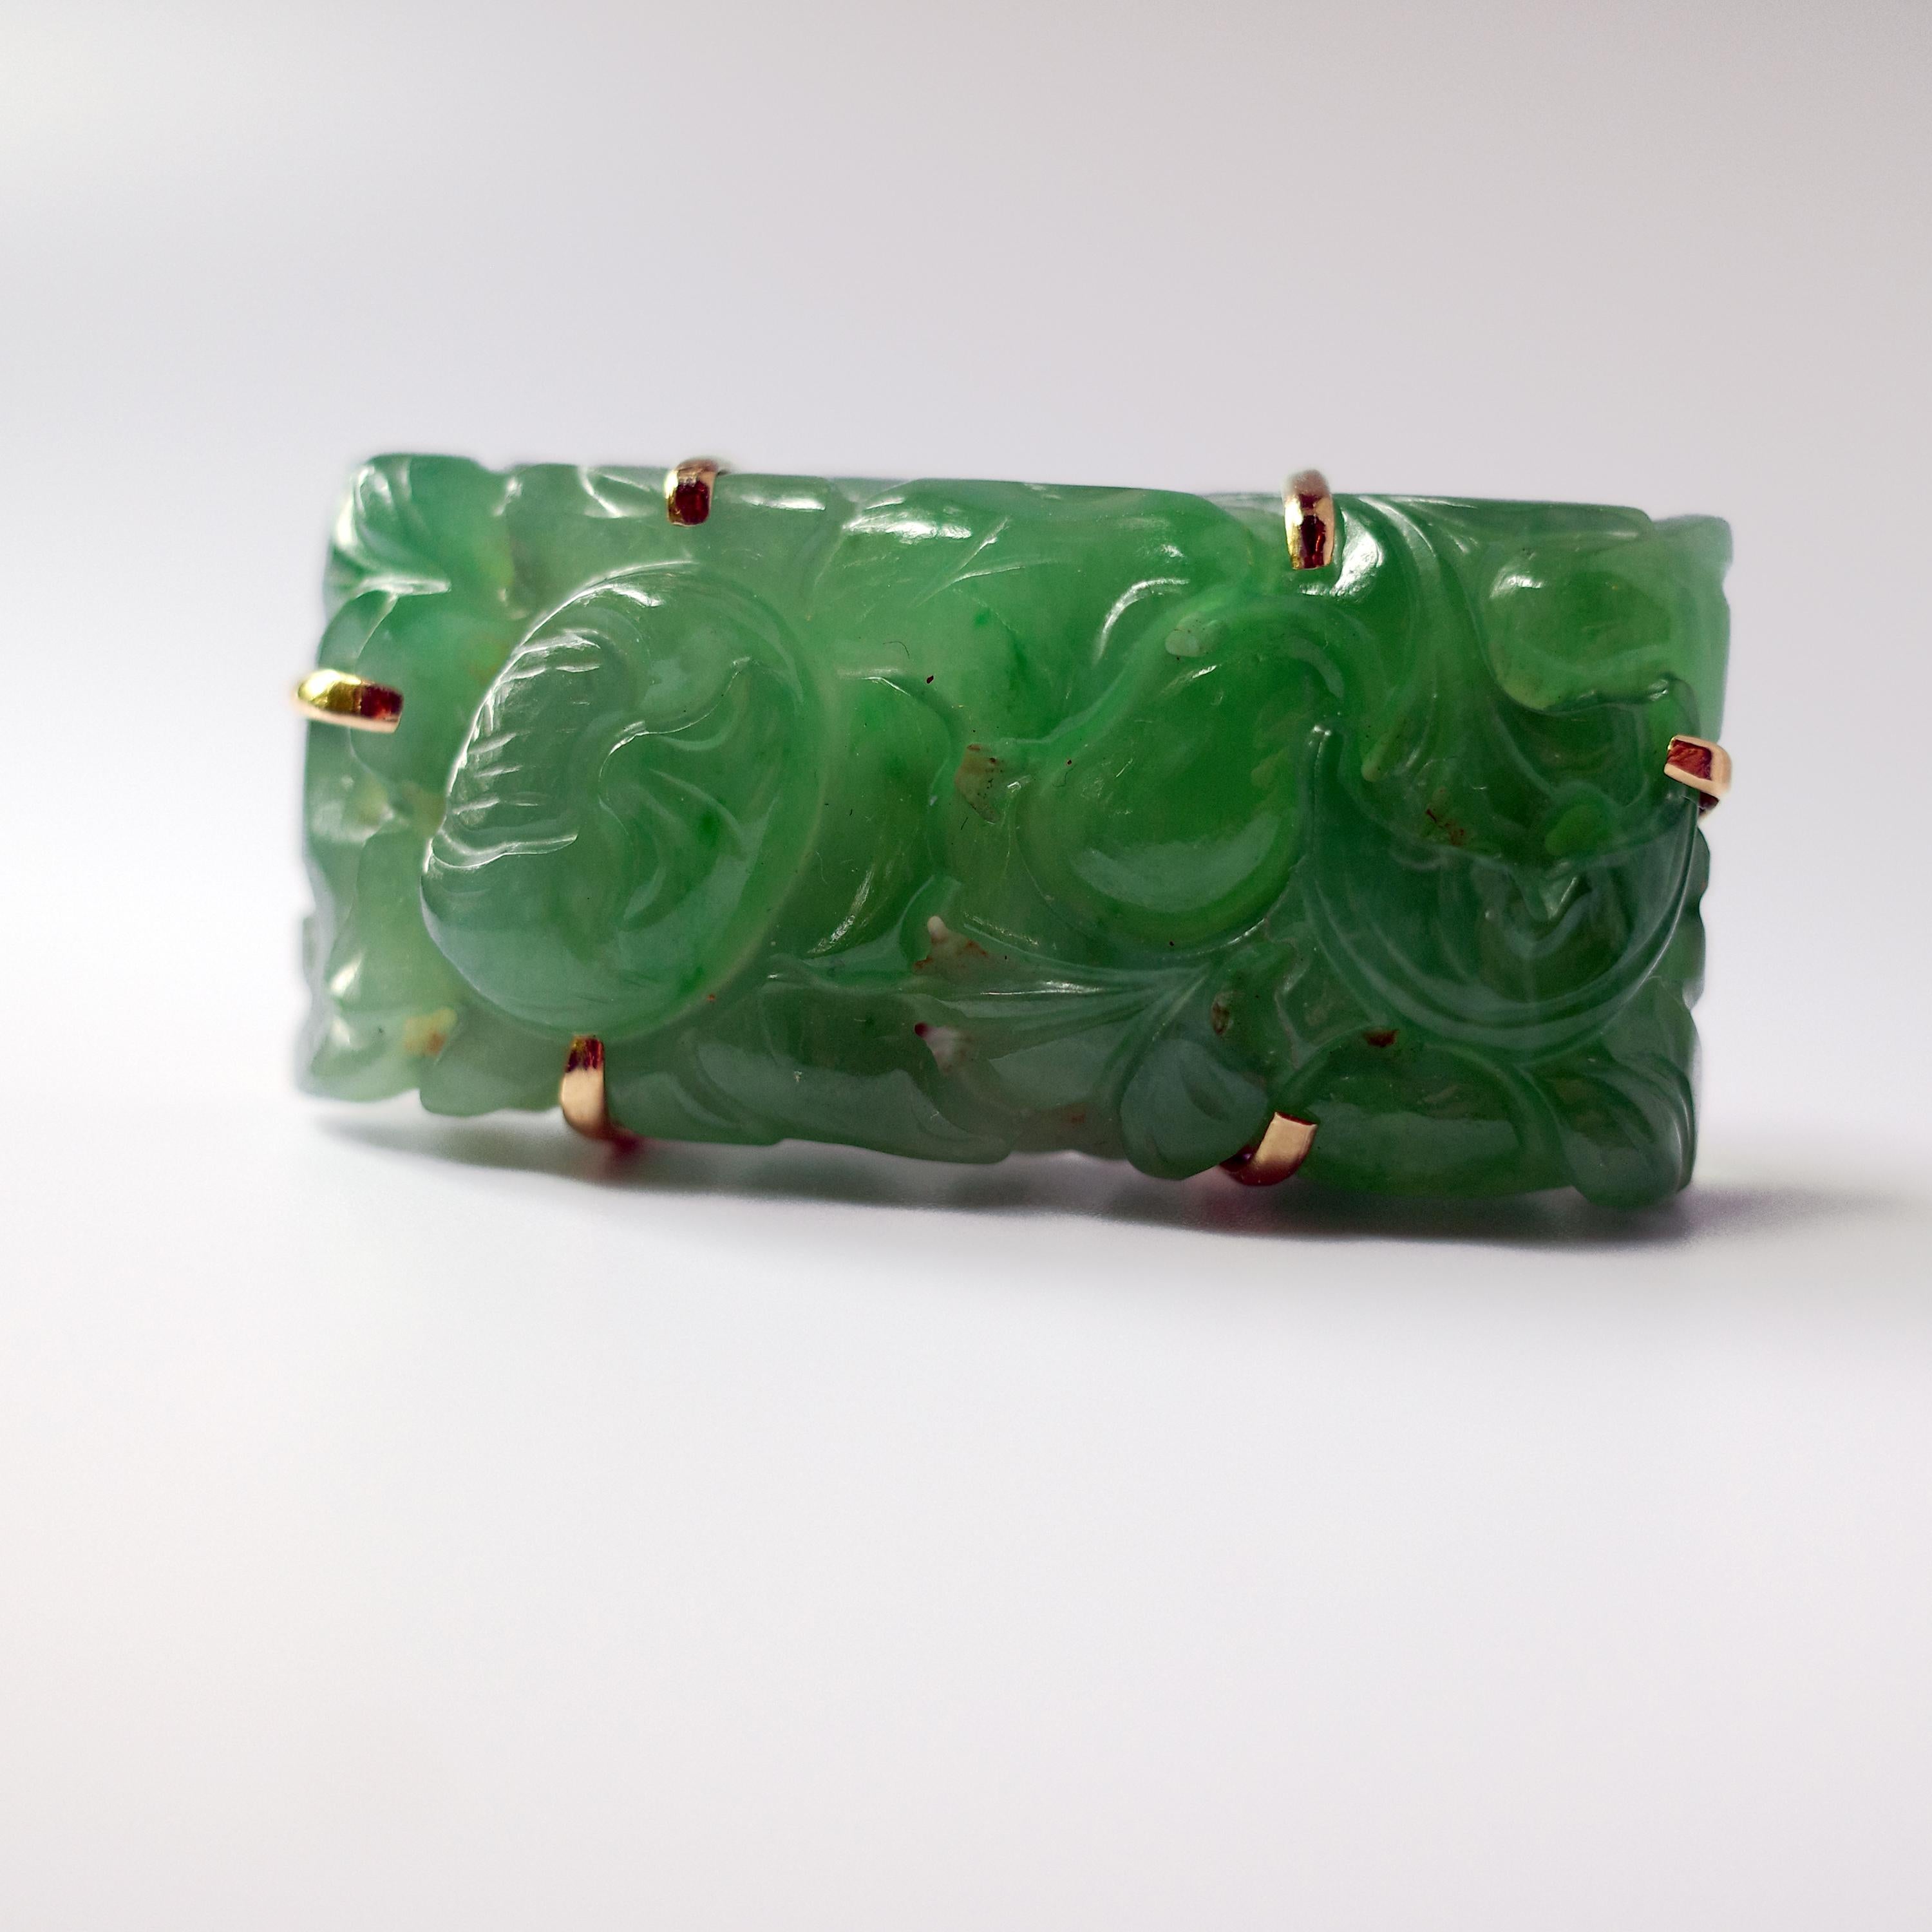 Featuring a light apple green jadeite jade stone carved in a floral motif and set within a beautifully designed 14K rose gold framework, this Art Deco period brooch is quite the stunning rectangle of color, translucency and spring-green. Check out